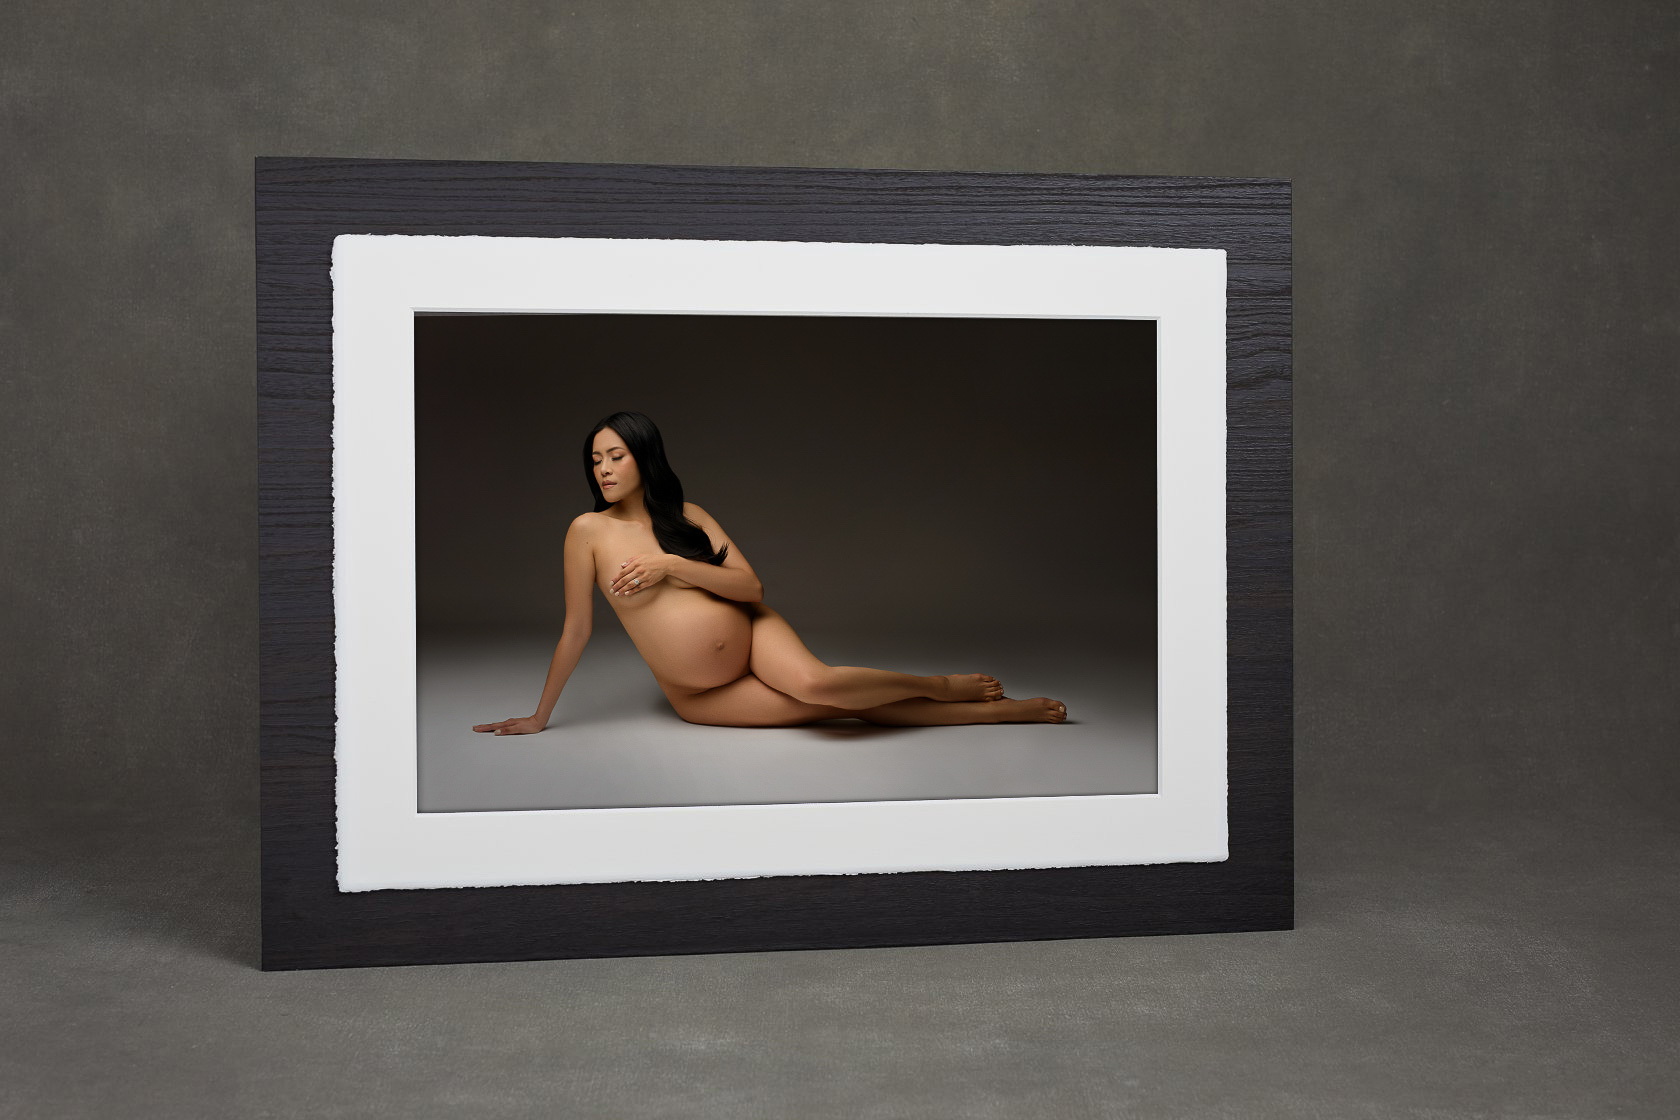 Sample photo of a Maternity portrait product, a matted print mounted to a wood backing, luxurious and high quality.